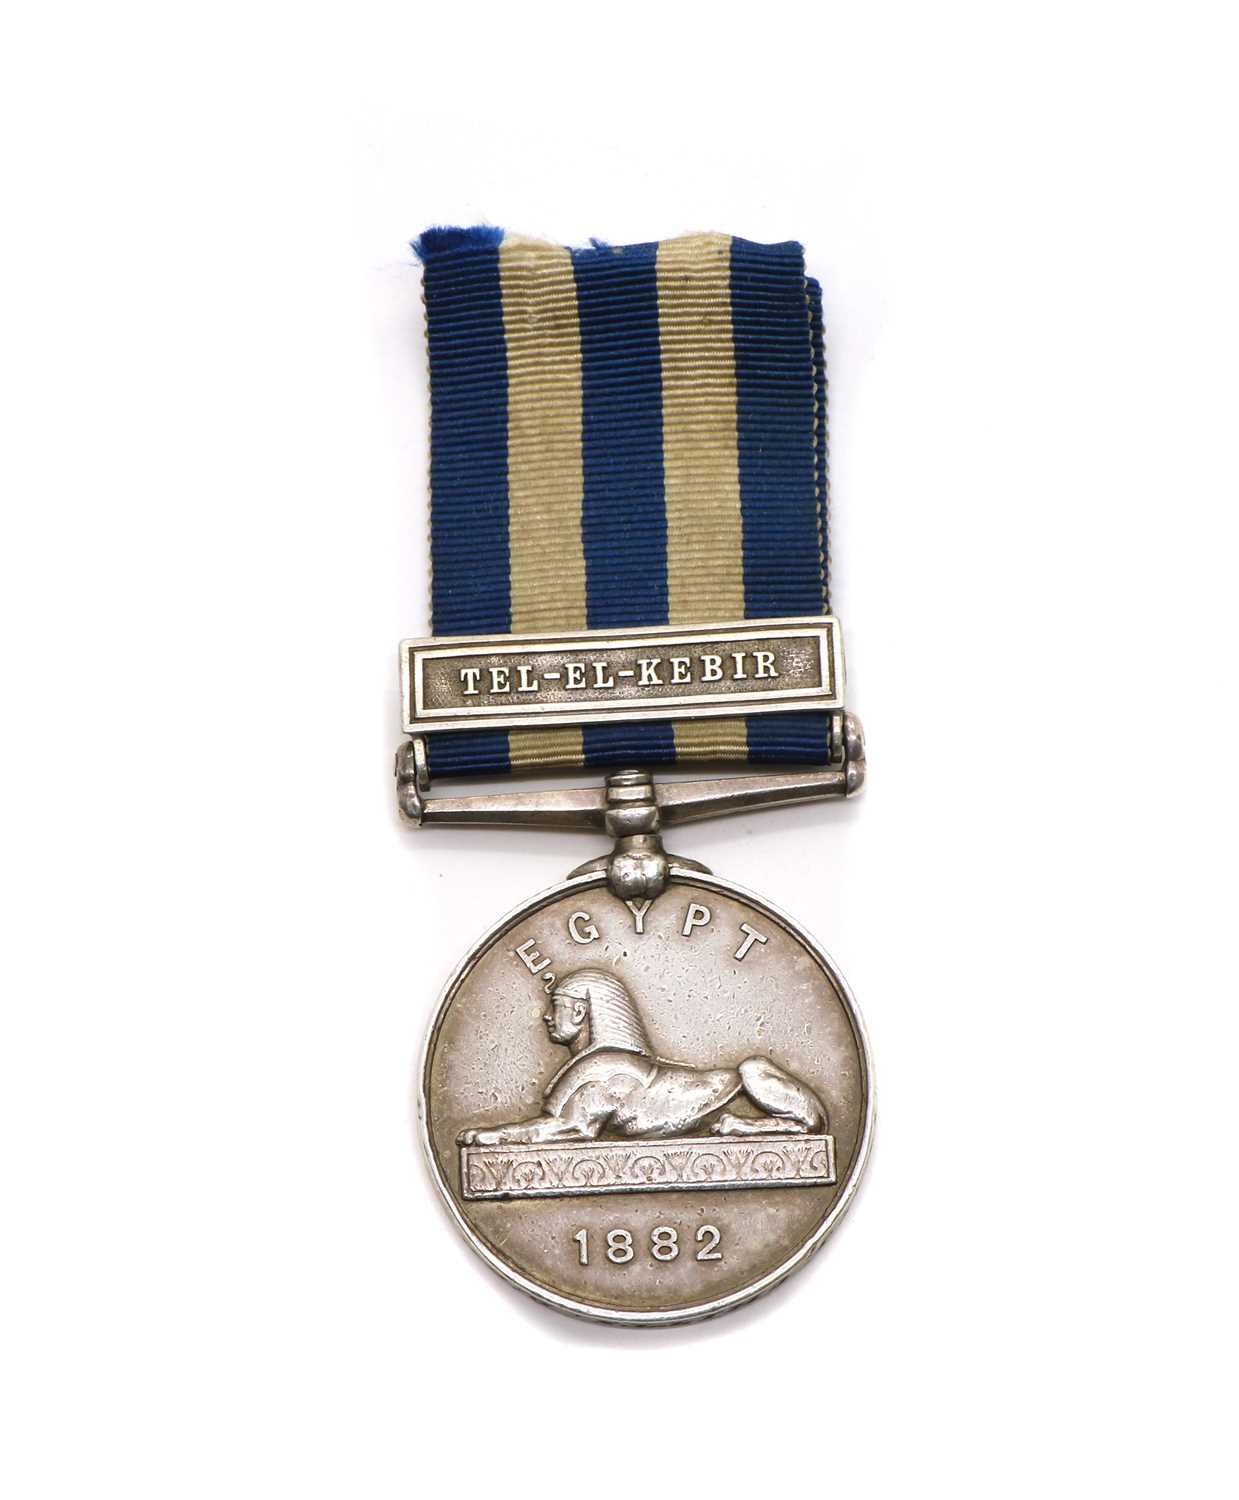 Lot 49 - An Egypt 1882 Campaign Medal